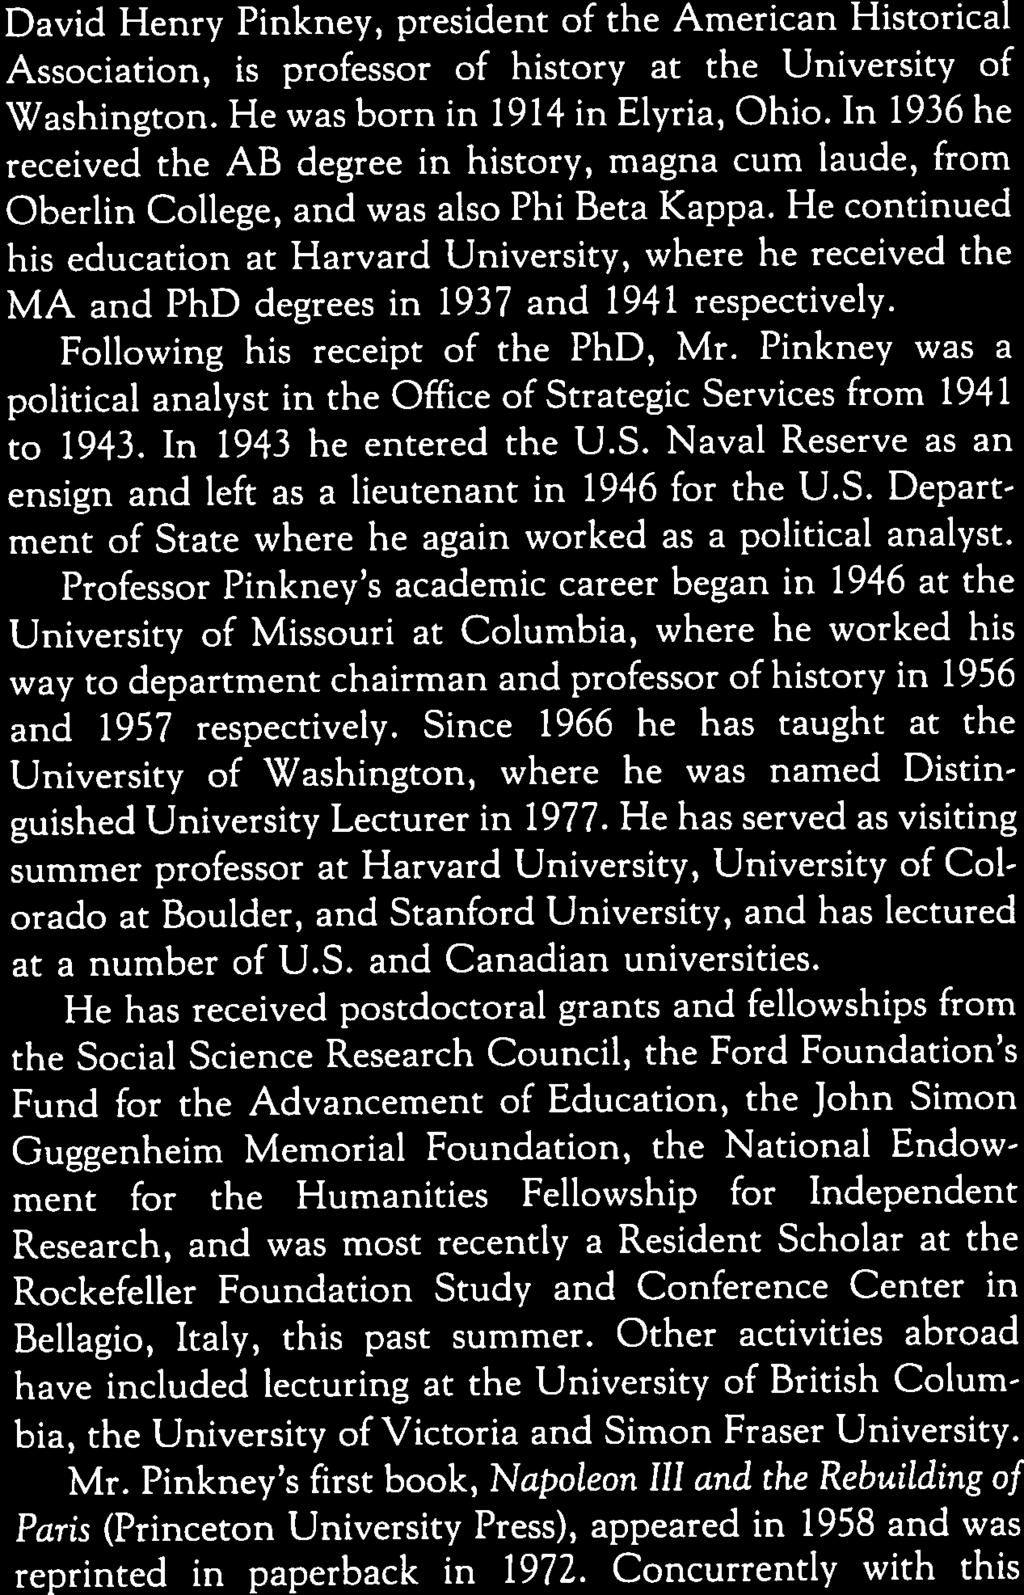 David Henry Pinkney, president of the American Historical Association, is professor of history at the University of Washington. He was born in 1914 in Elyria, Ohio.